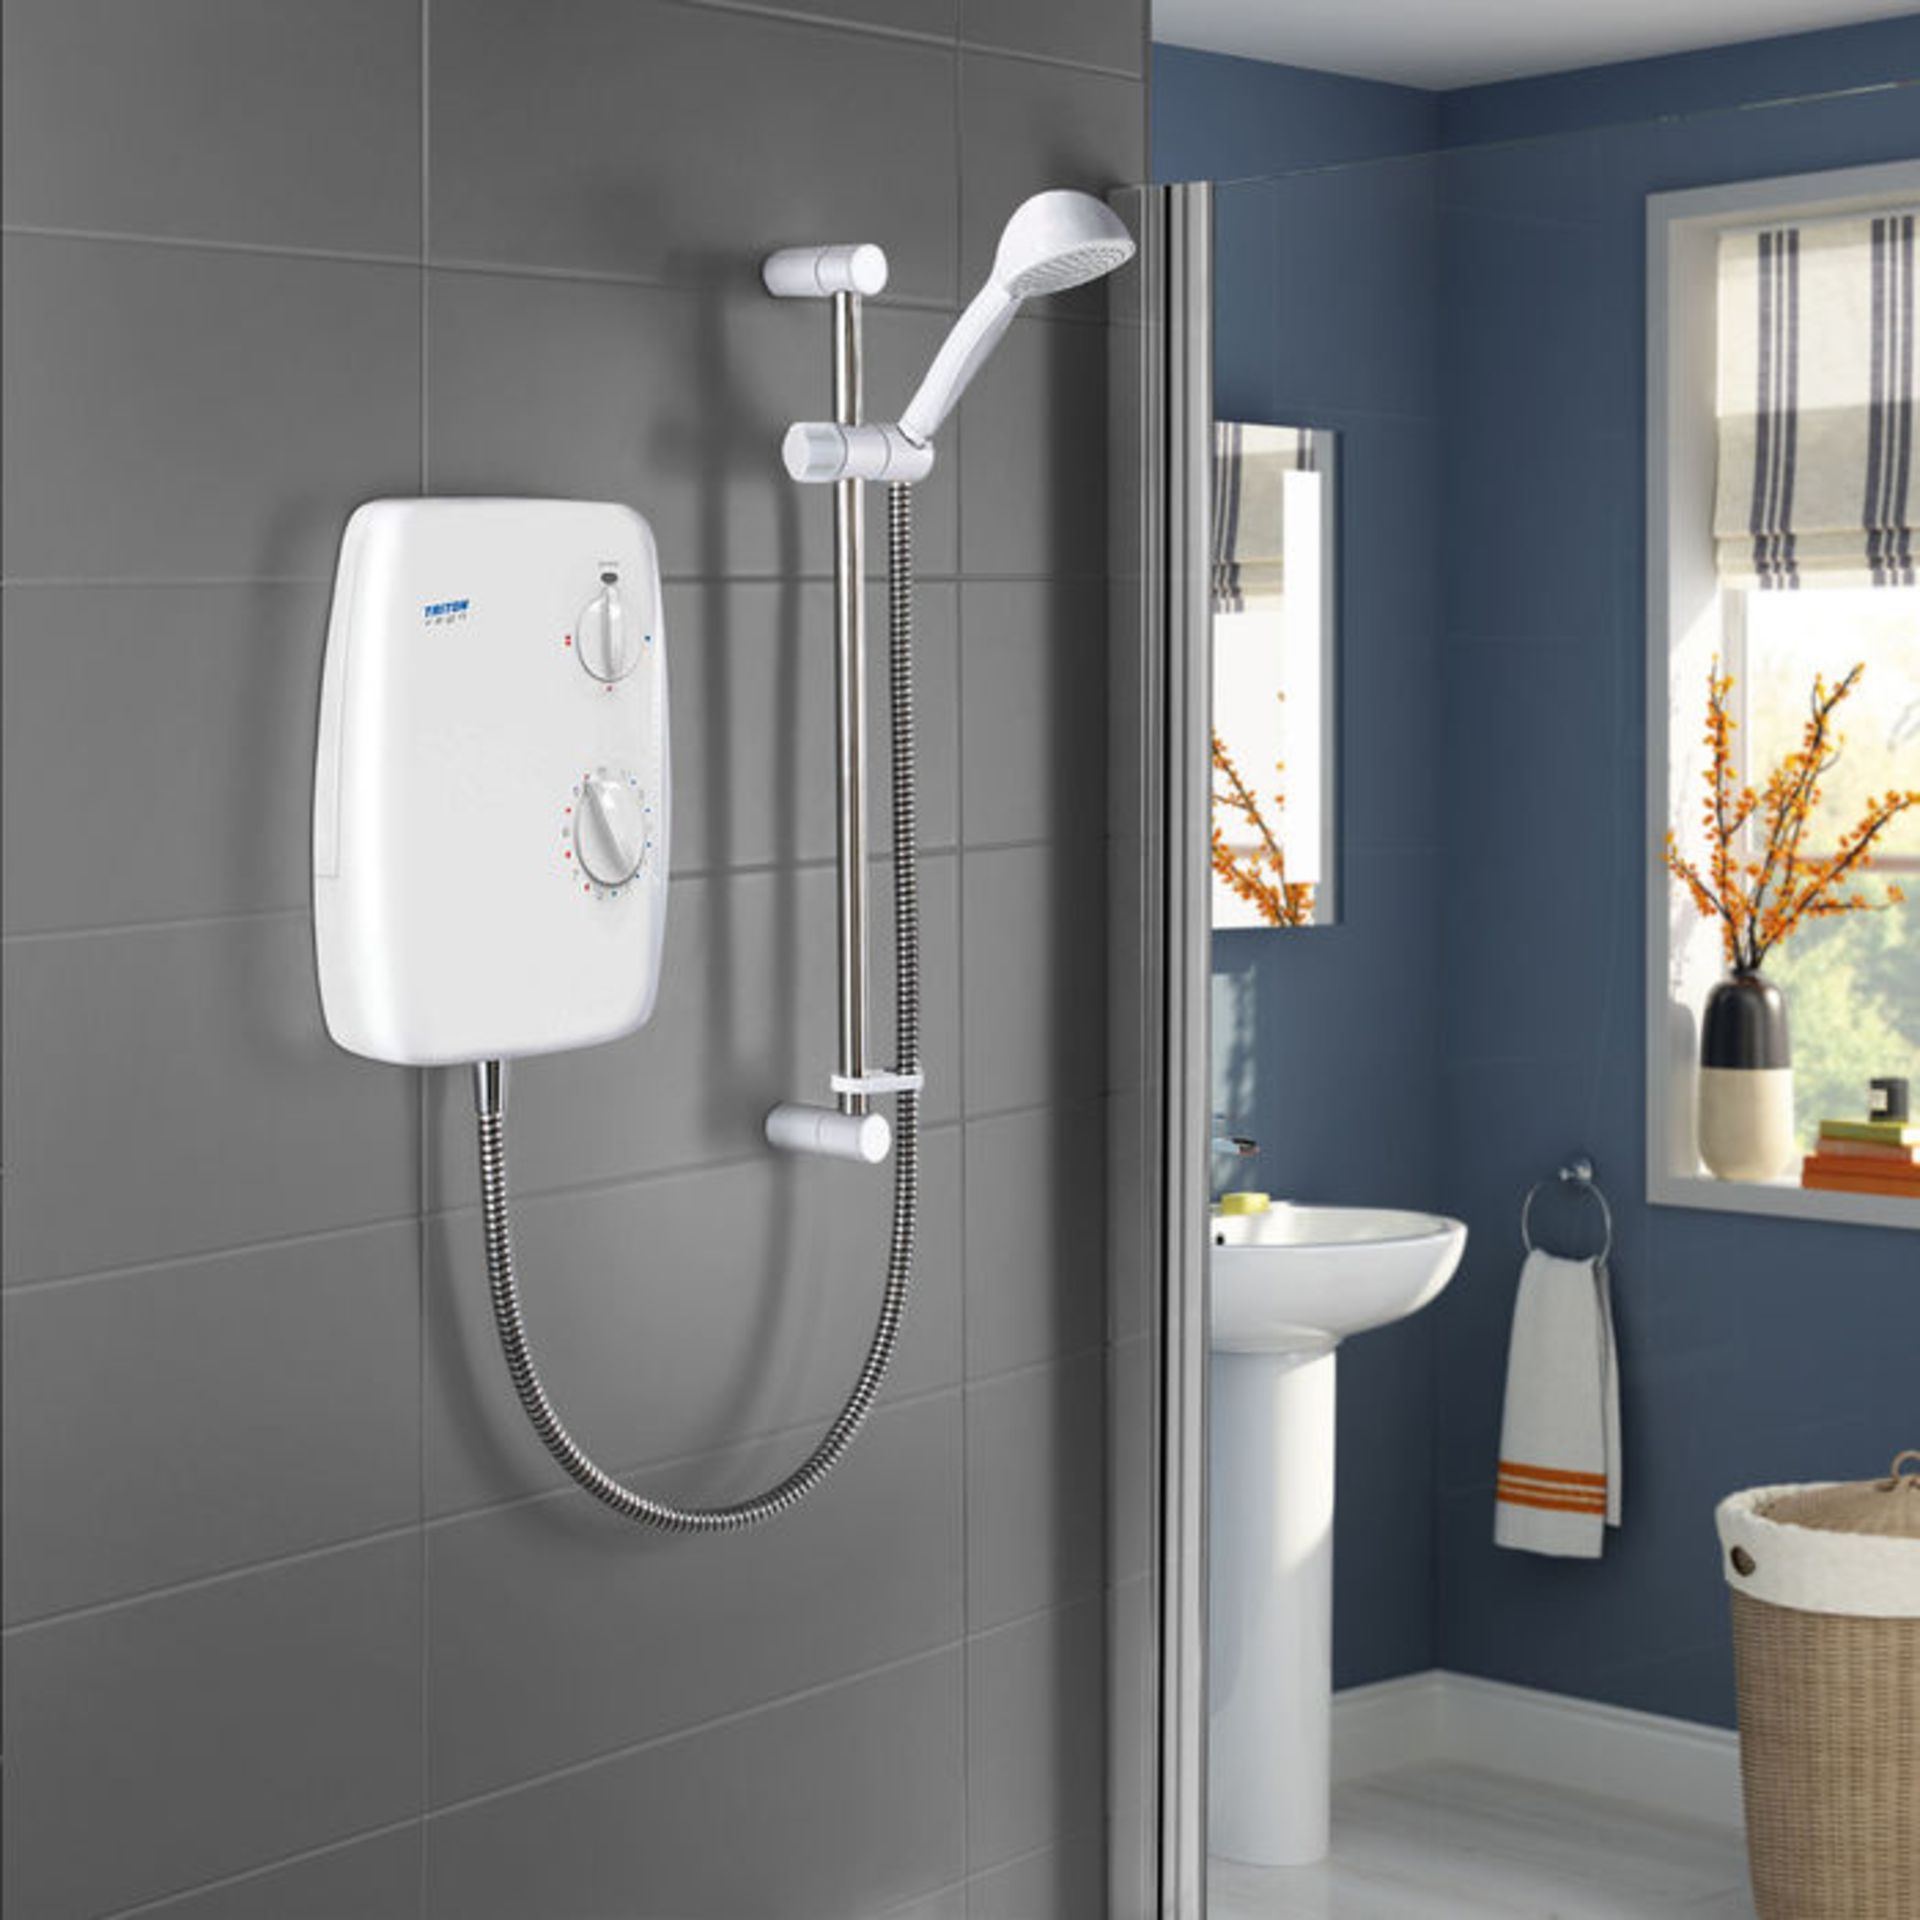 (A213) 8.5kW Triton Vega Electric Shower. RRP £529.99. Compatible with virtually any household... - Image 2 of 3